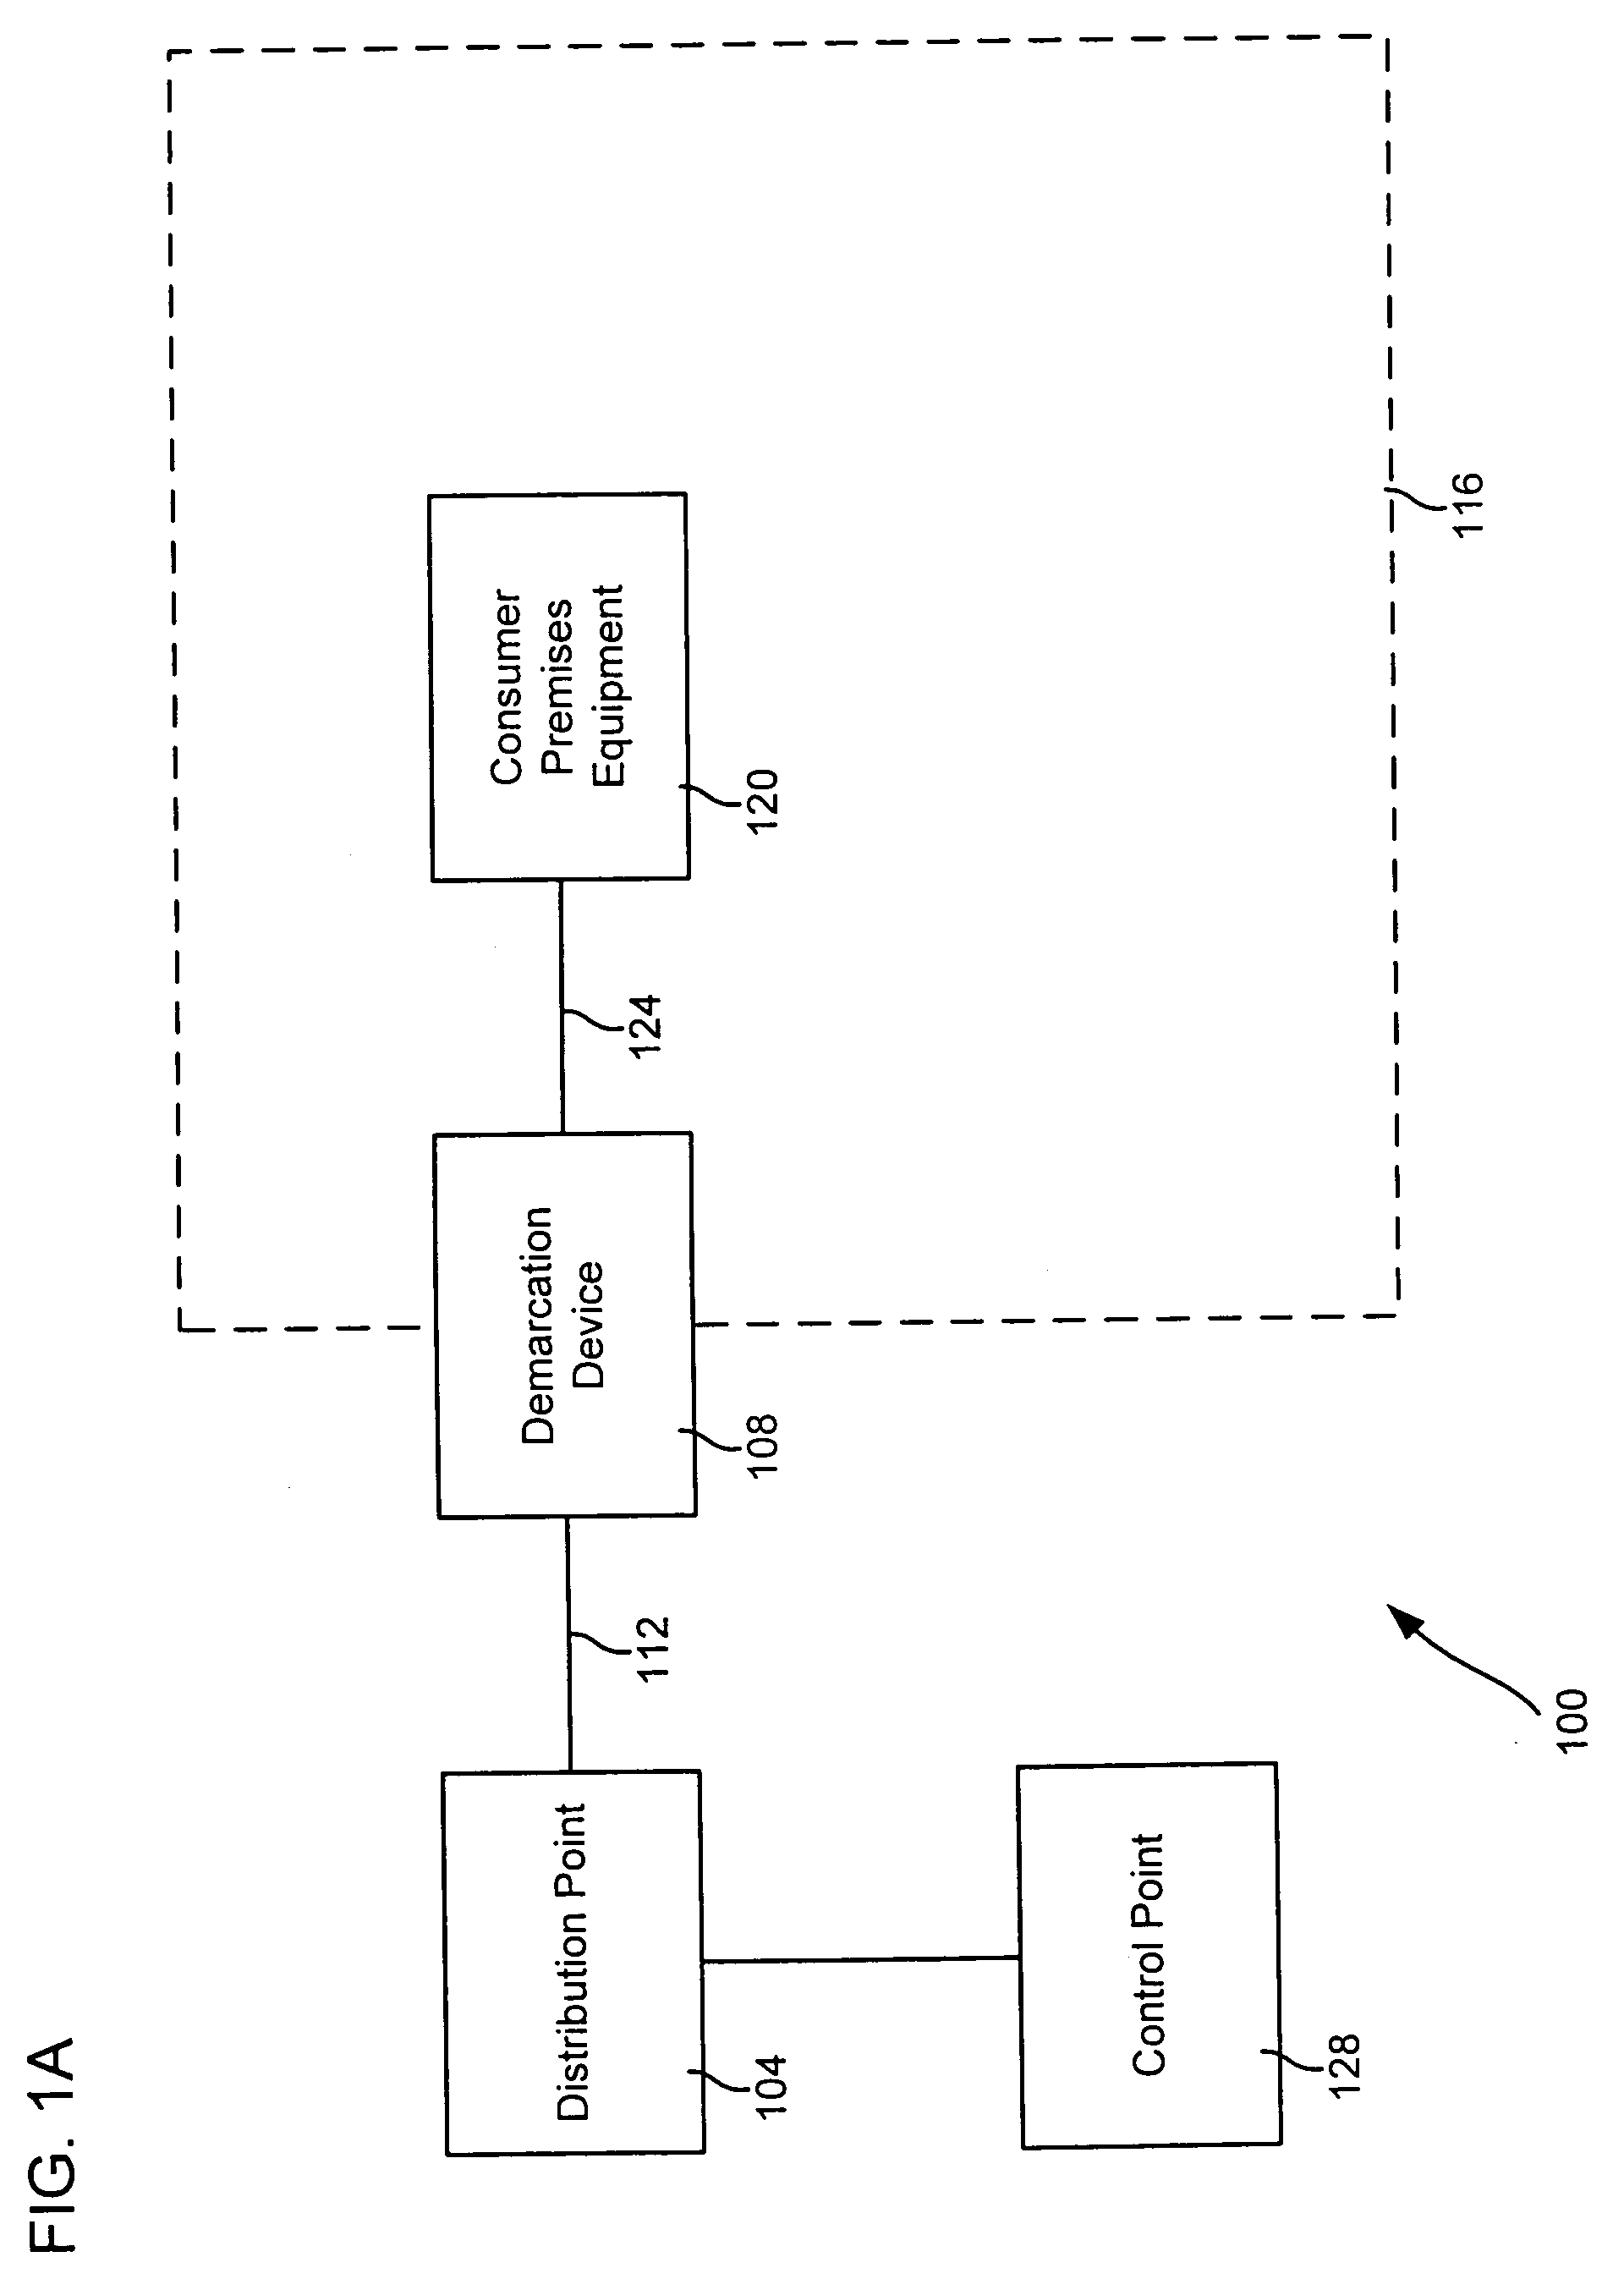 Fiber optic internet protocol network interface device and methods and systems for using the same